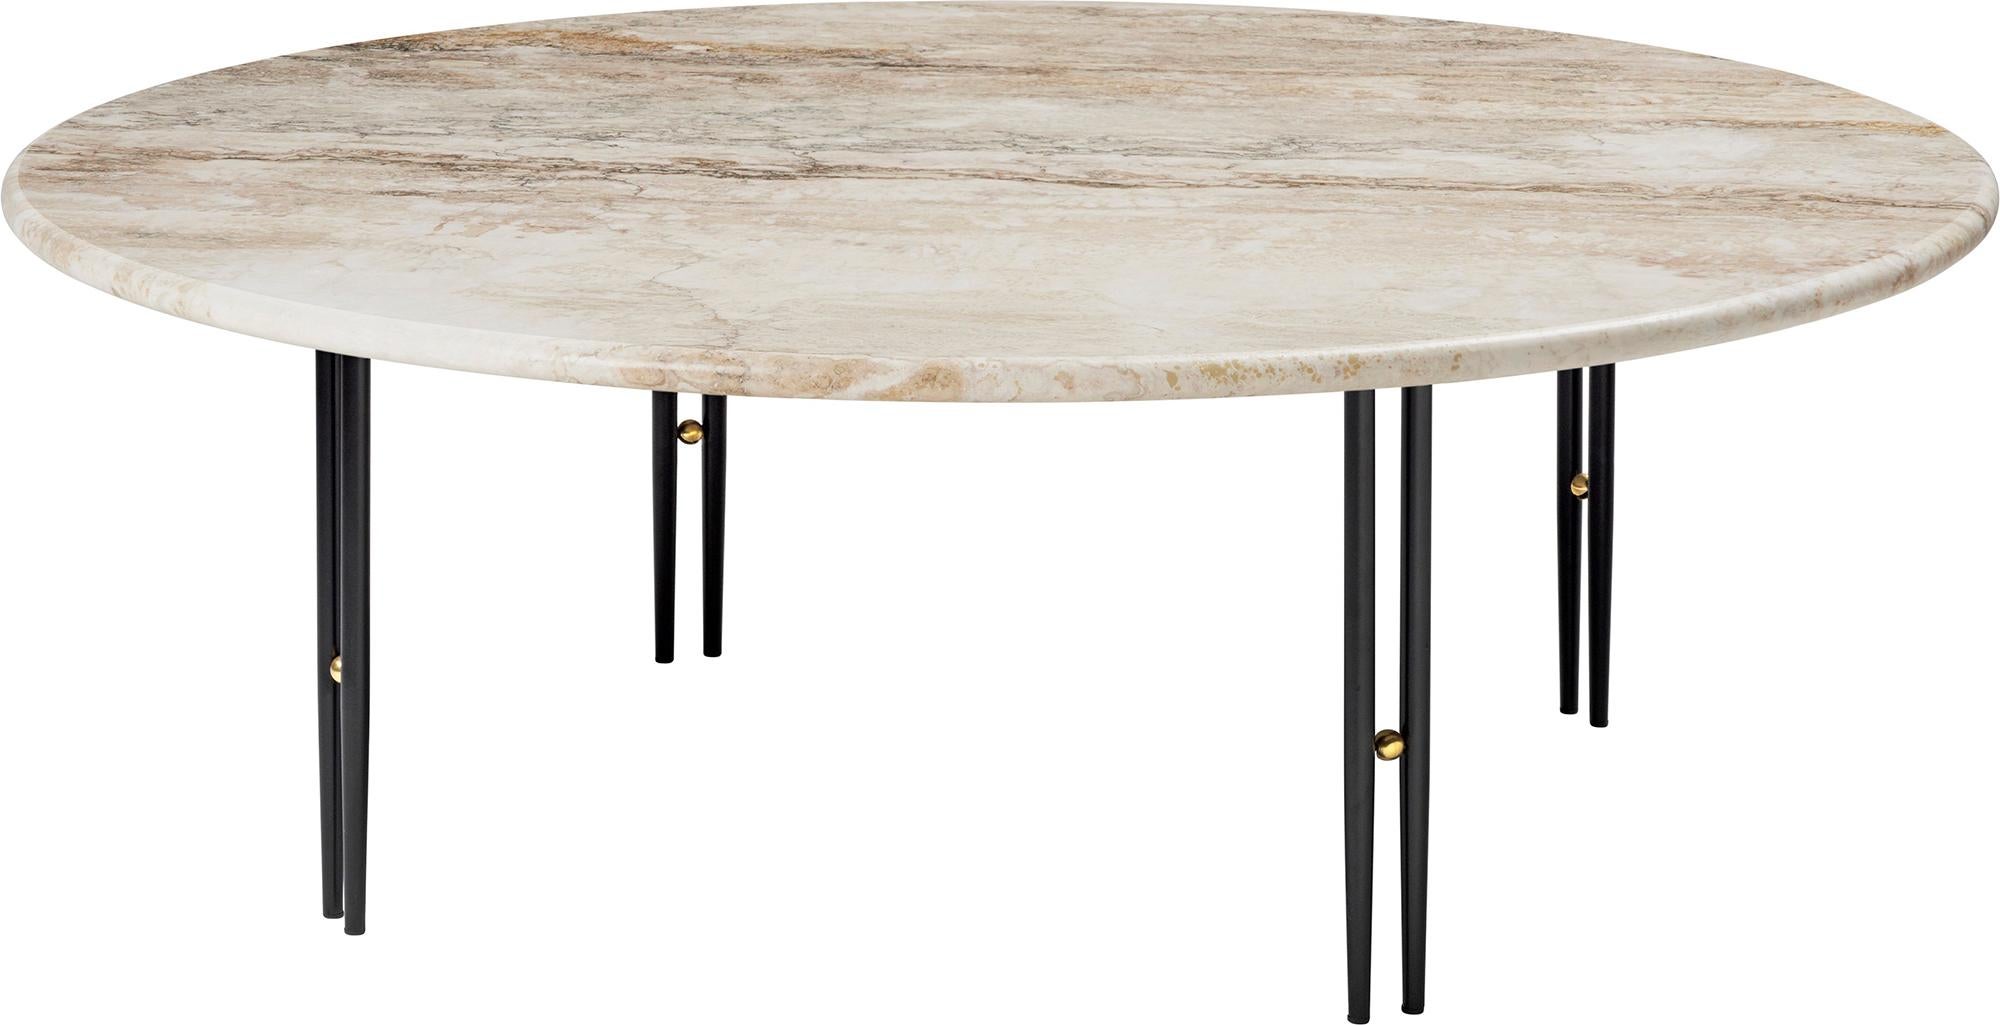 Large ‘IOI’ Travertine Coffee Table by GamFratesi for GUBI For Sale 9